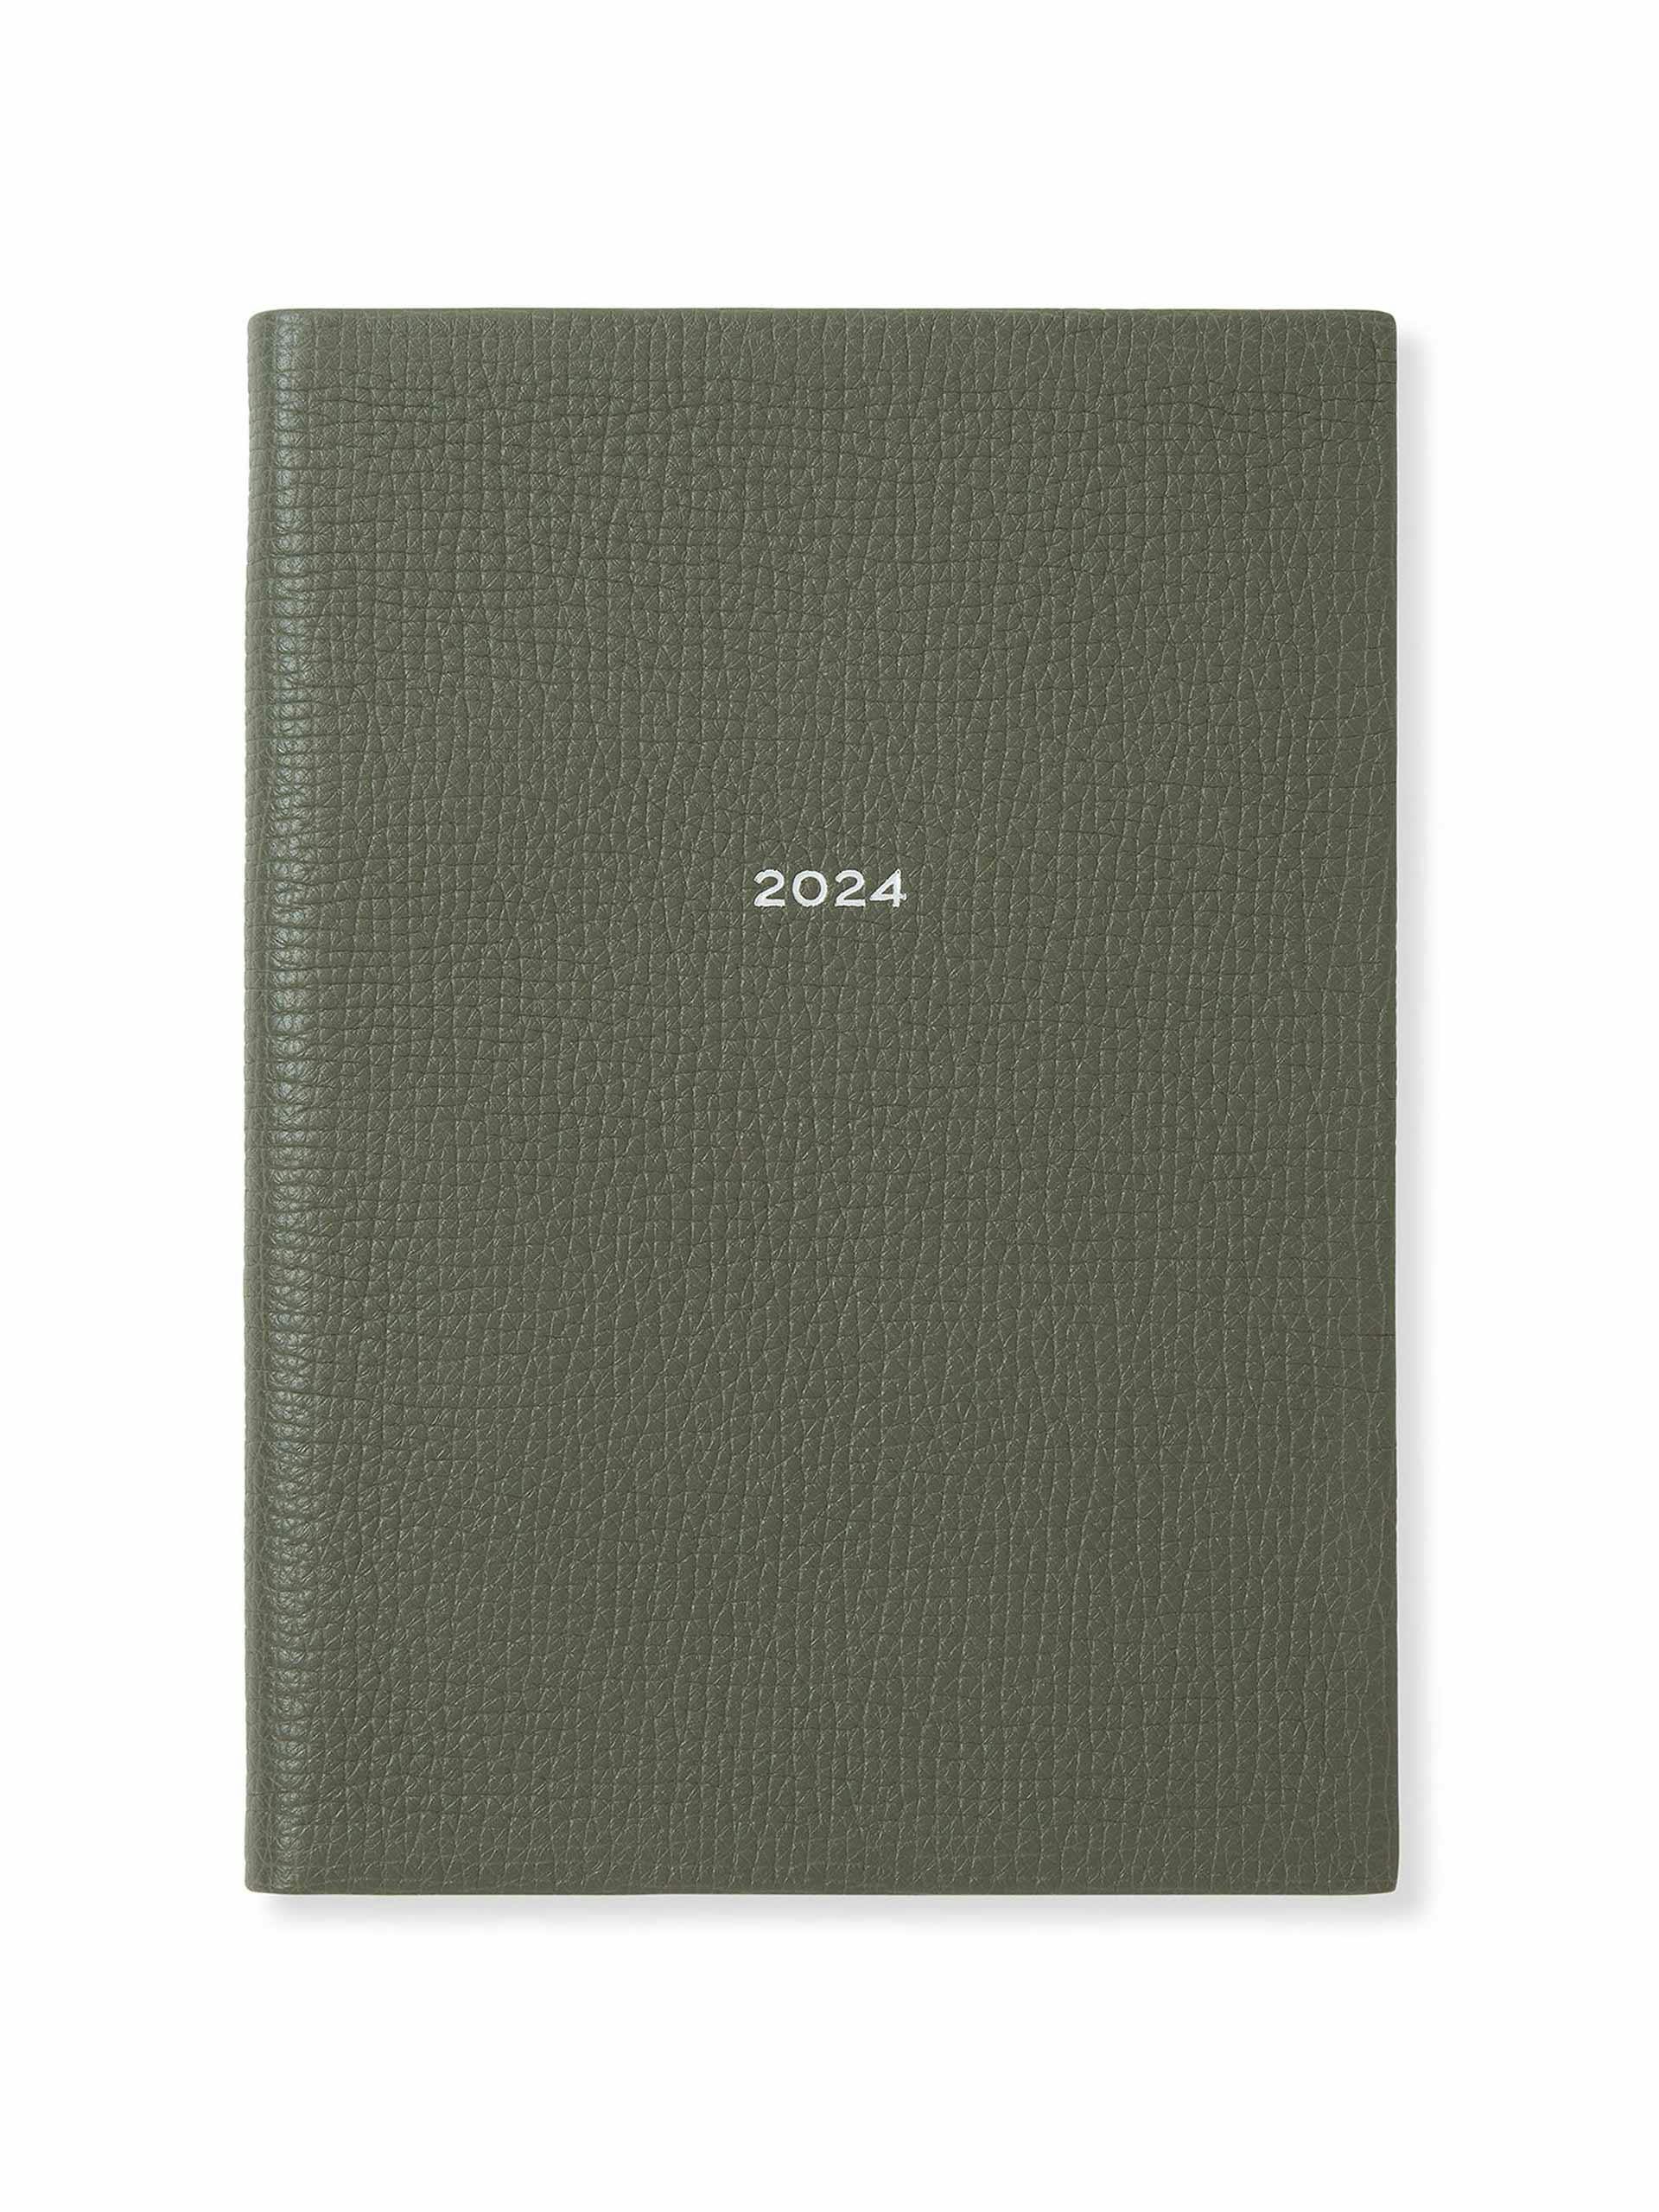 2023-2024 weekly diary